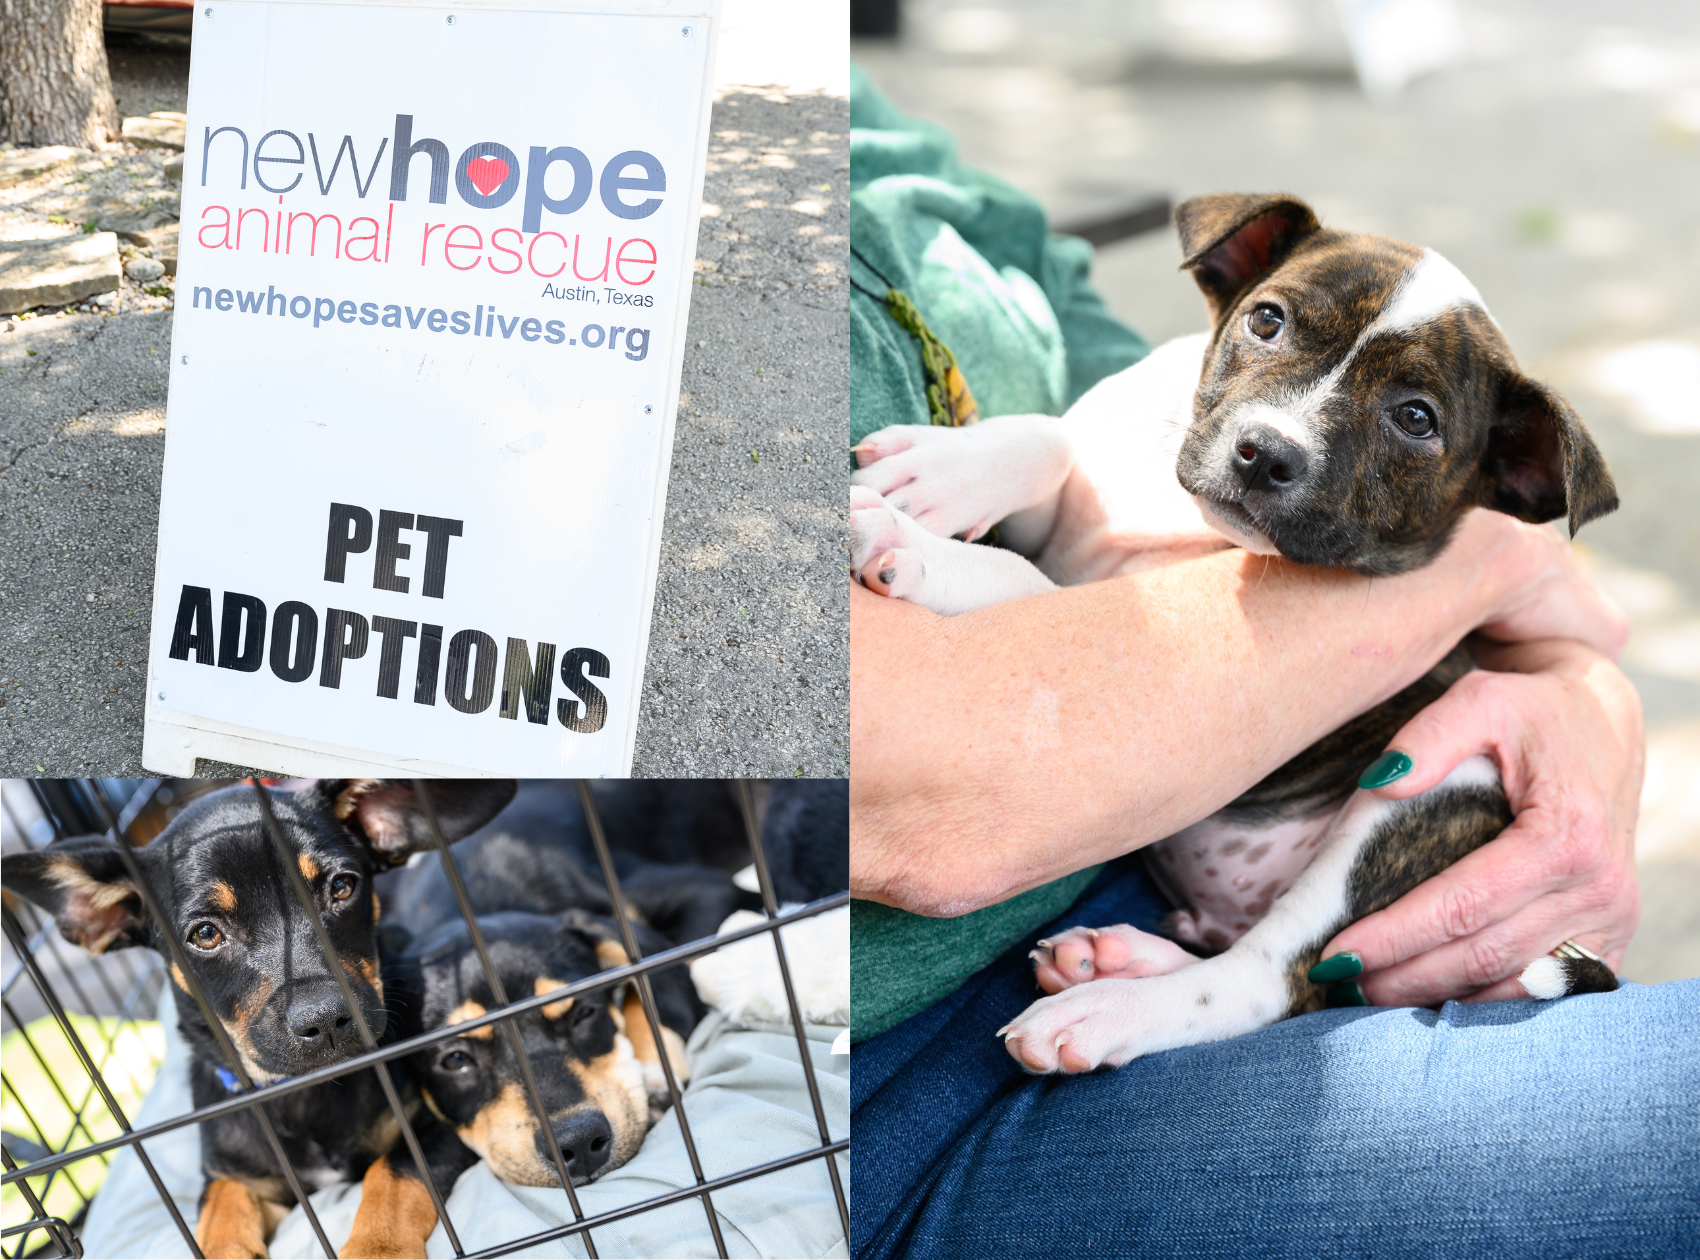 A sign with New Hope Animal Rescue pet adoptions, a puppy with white and brown markings being held by someone and two puppies in a crate with black and brown markings.